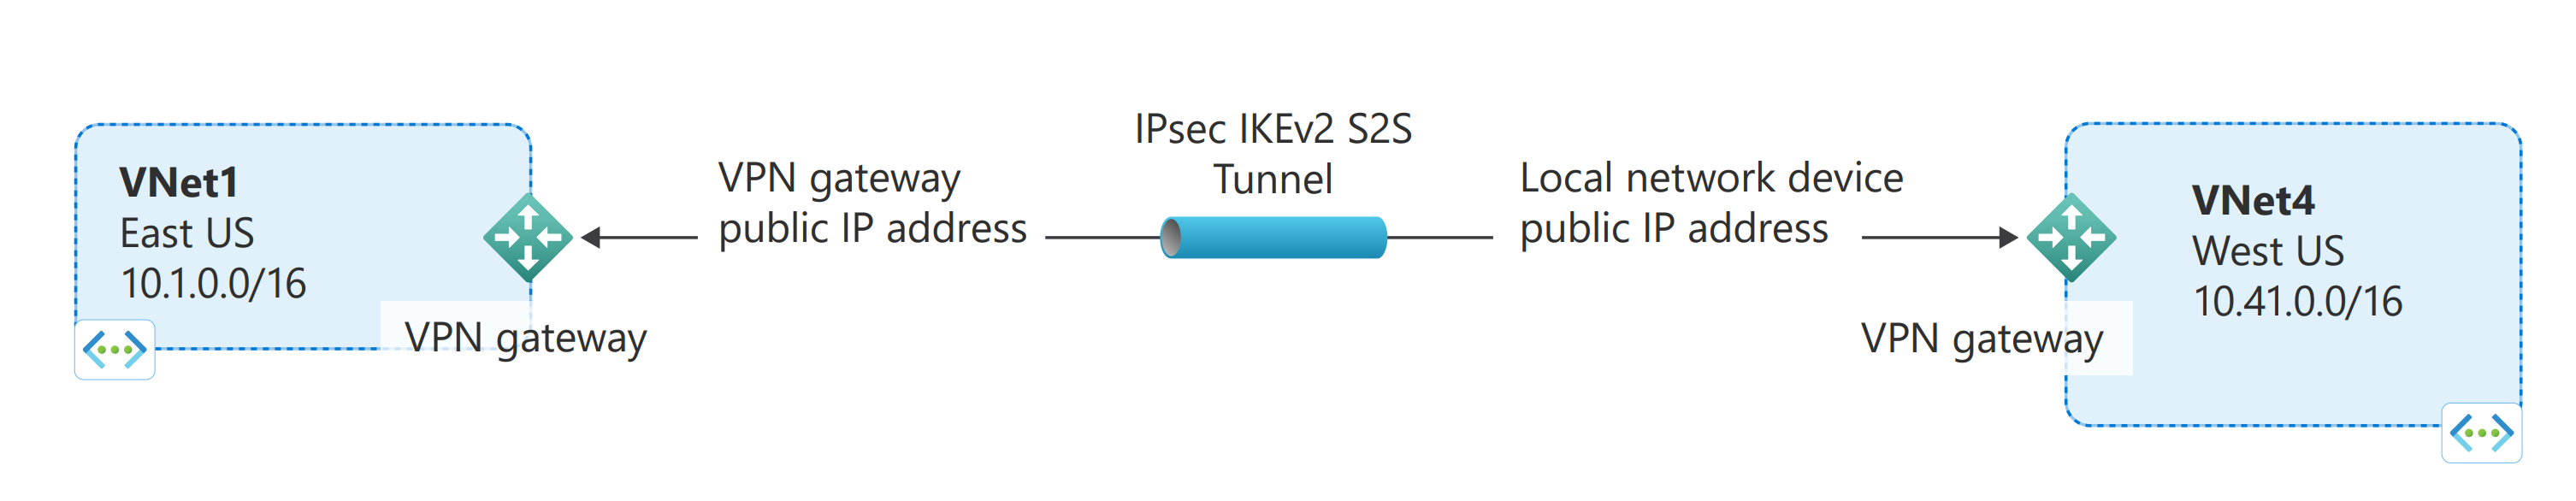 Diagram of VNet-to-VNet connections.